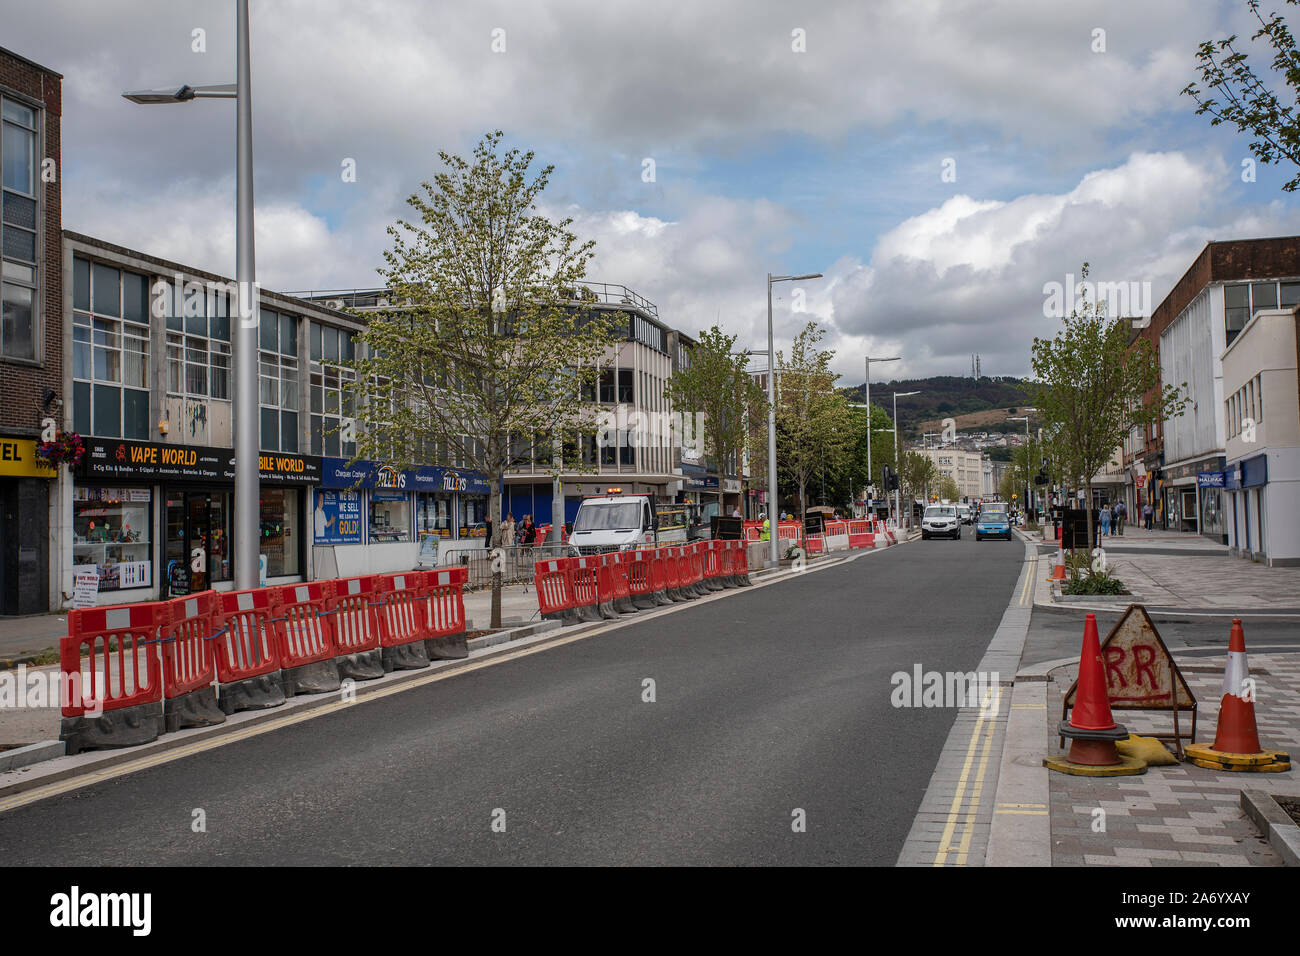 Pictured: A general view of road construction works on the Kingsway in Swansea city centre, Wales, UK.  Friday 12 July 2019  Re: General view of Swans Stock Photo